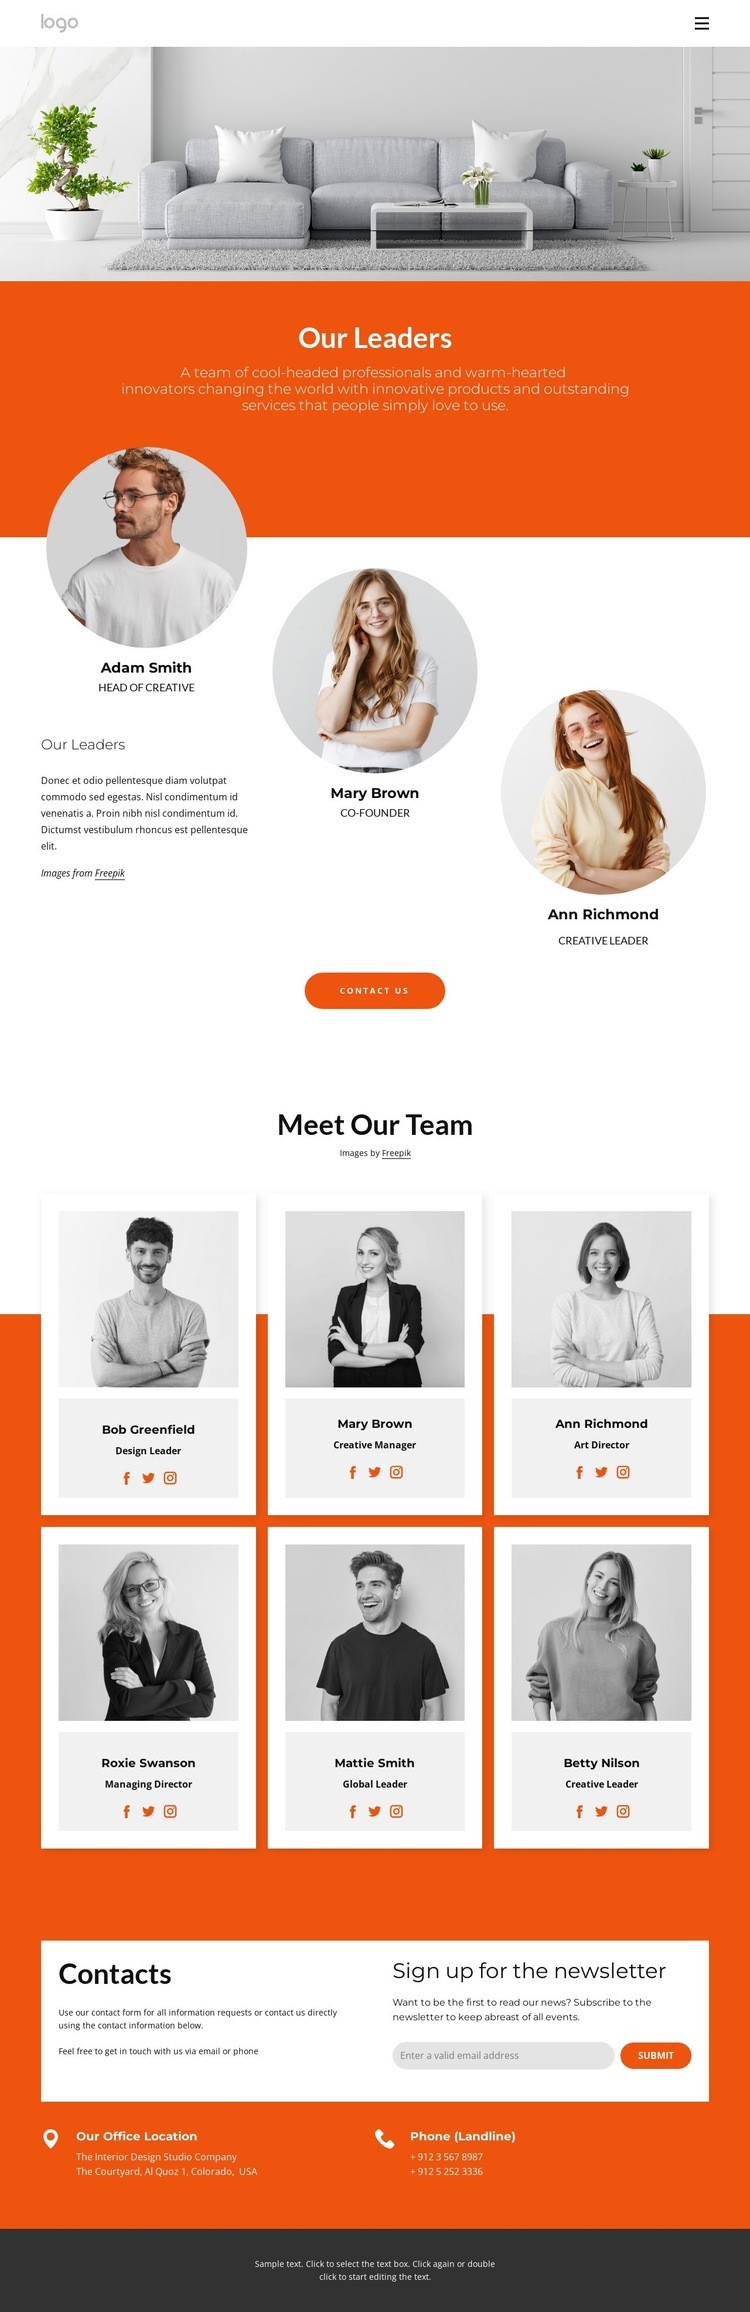 Our great team Wix Template Alternative